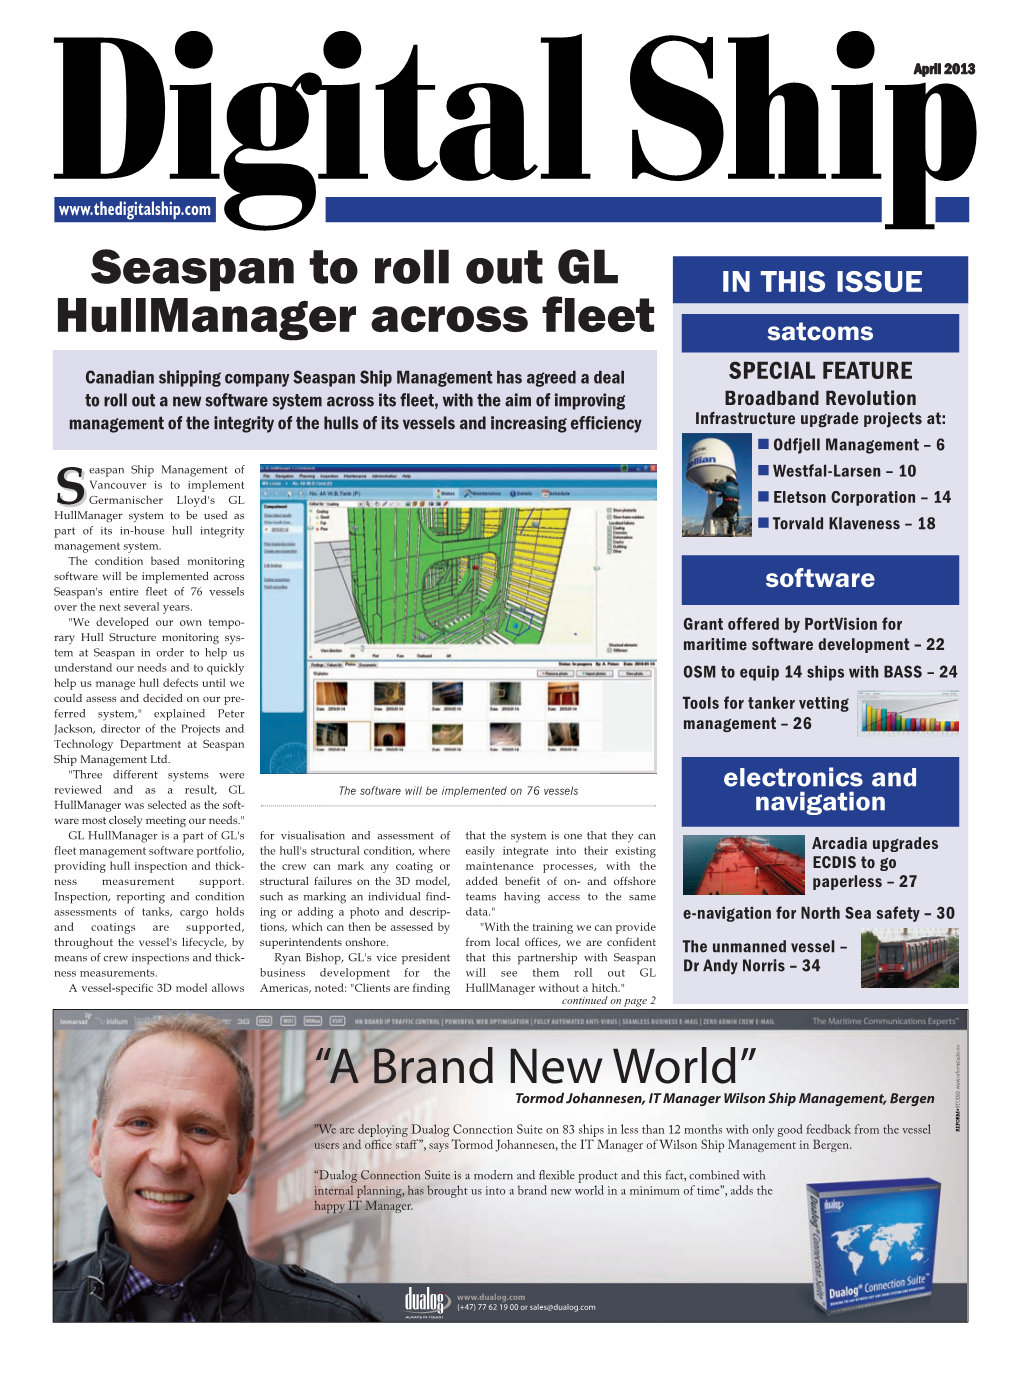 Seaspan to Roll out GL Hullmanager Across Fleet